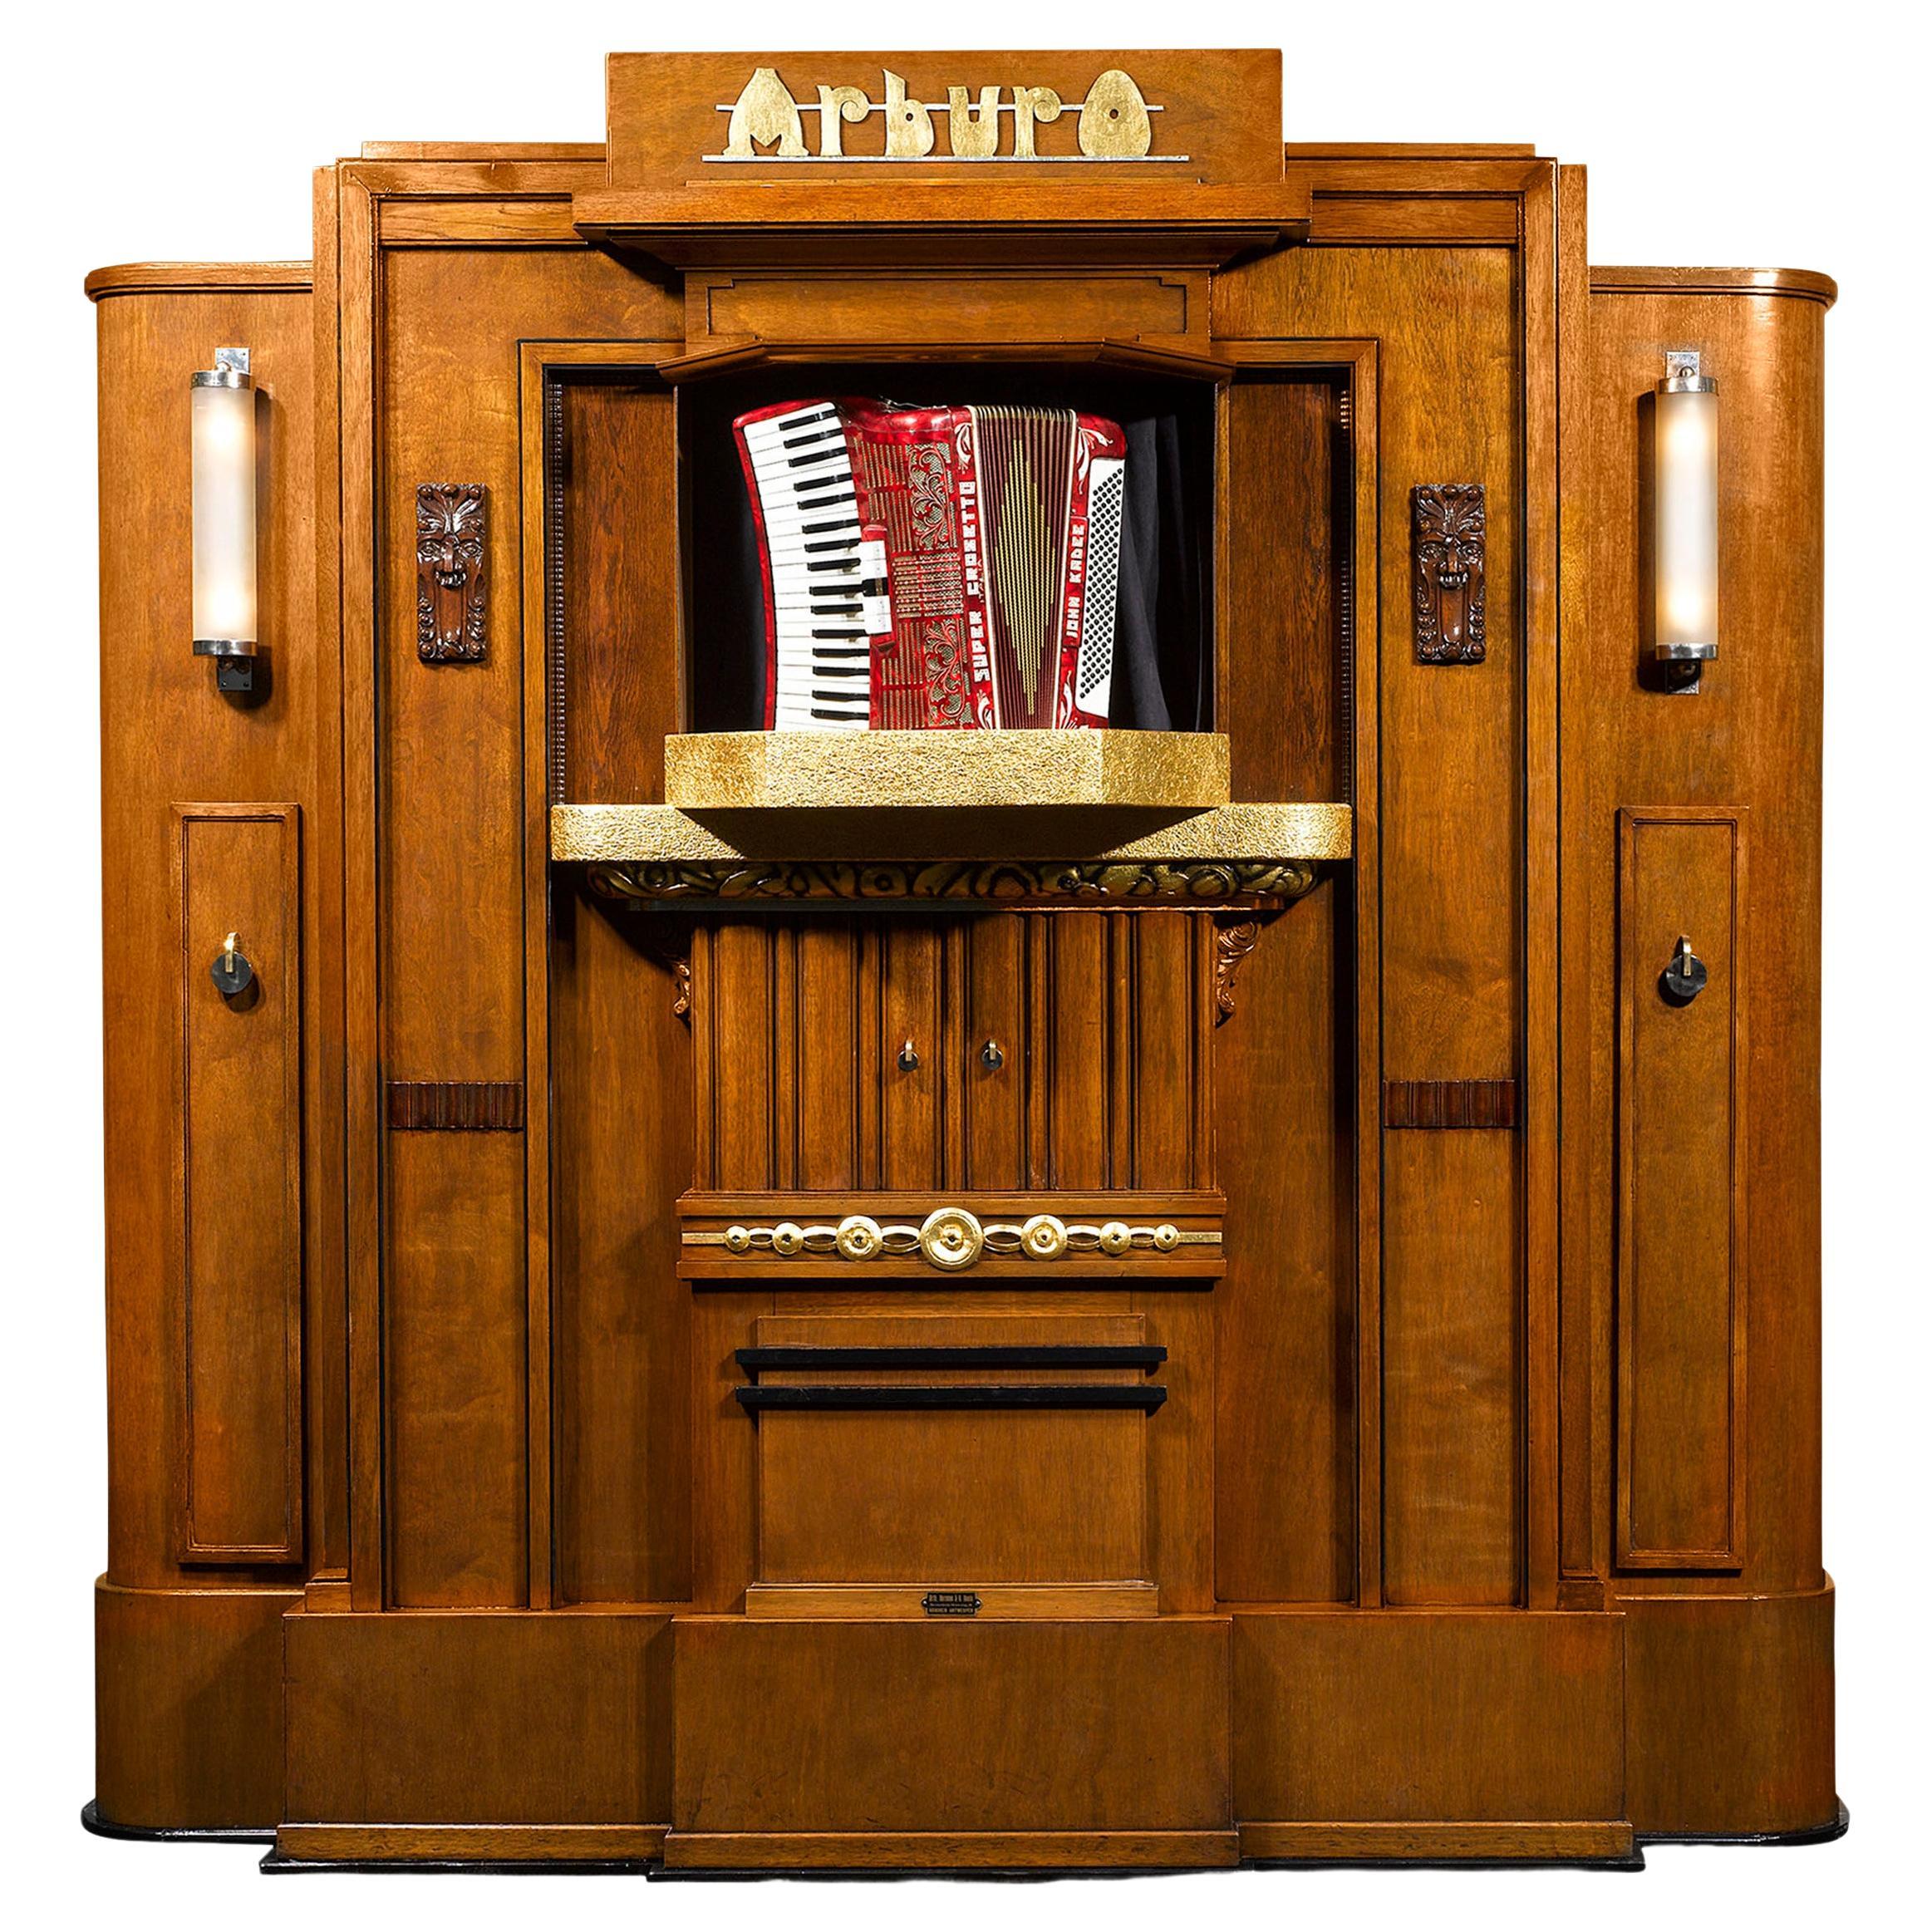 Arburo Orchestrion Organ By Bursens And Roels For Sale